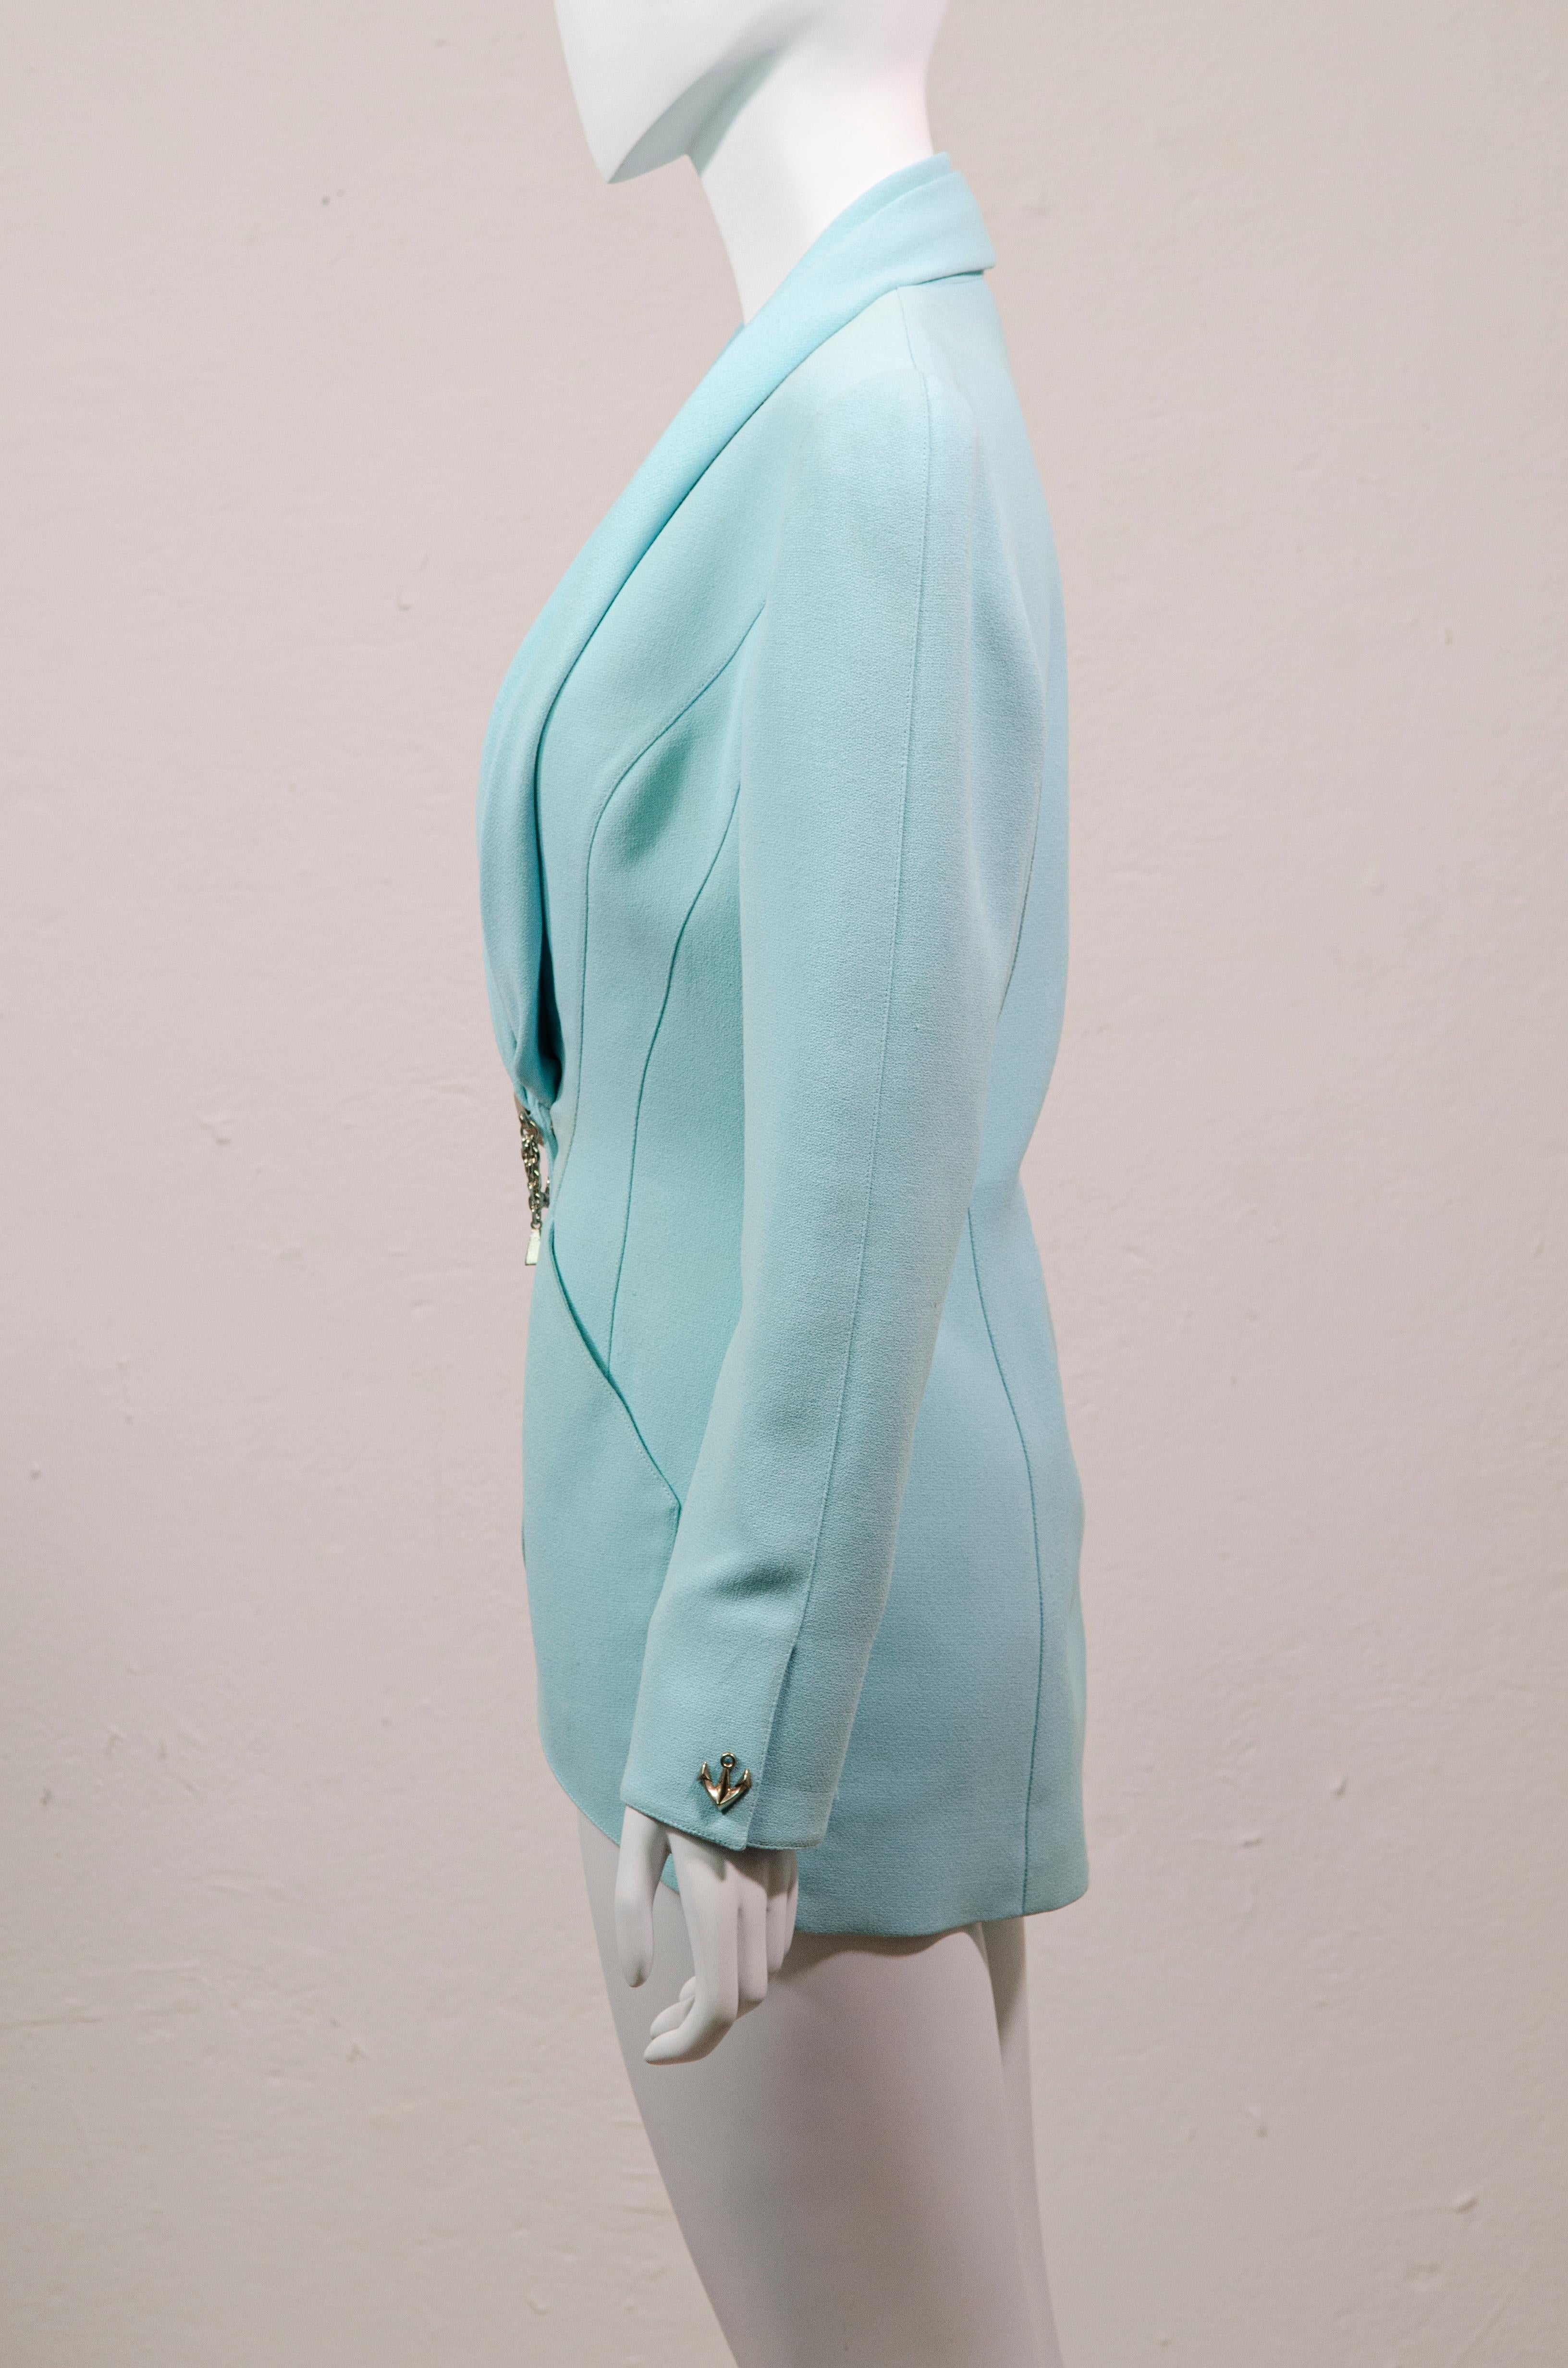 Women's Thierry Mugler Vintage Pastel Blue Jacket with Anchors Nautical Aquatic